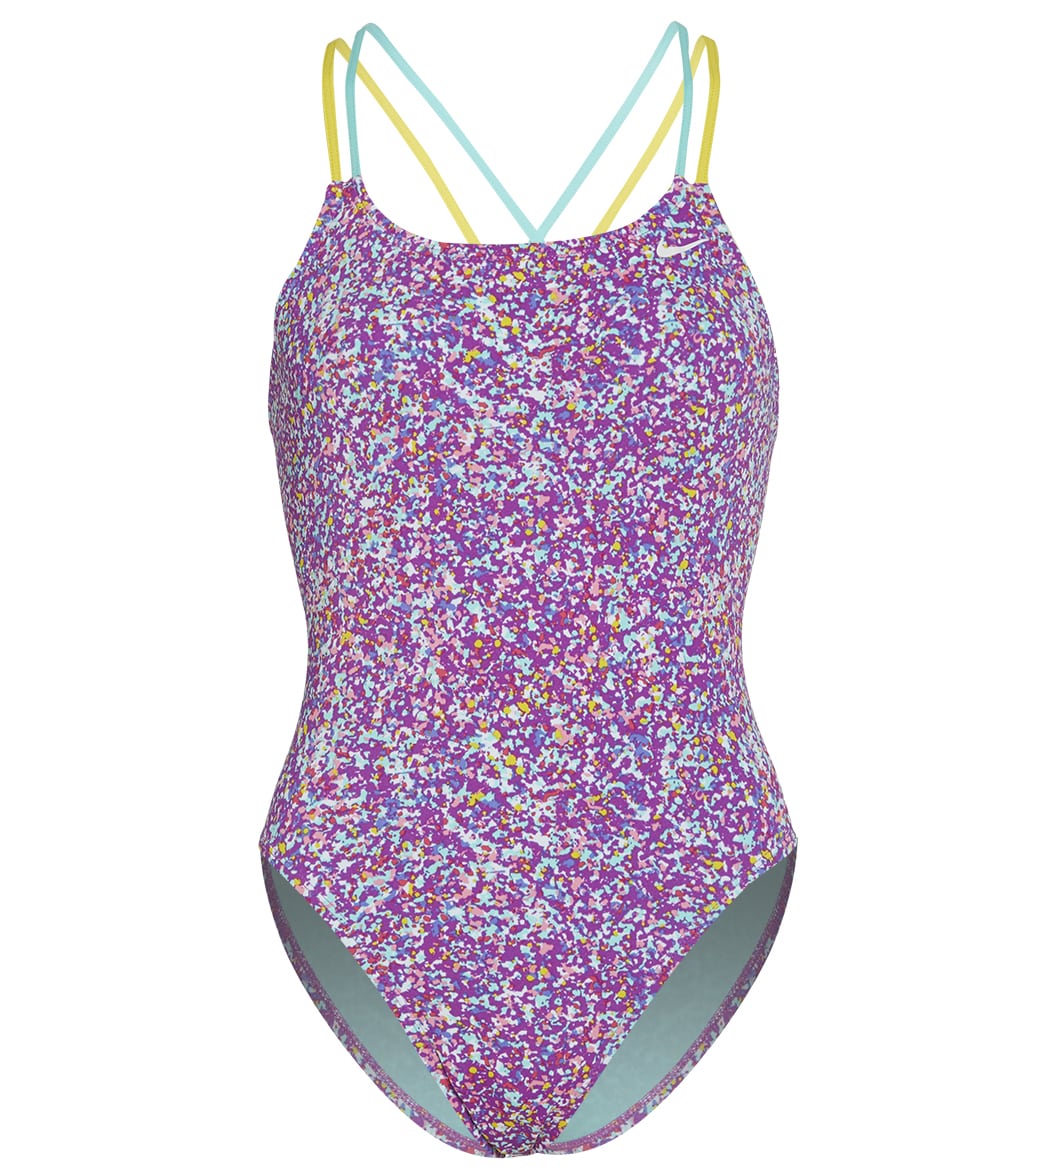 Nike Women's Hydrastrong Pixel Party Spider Back One Piece Swimsuit - Vivid Purple 24 Polyester - Swimoutlet.com